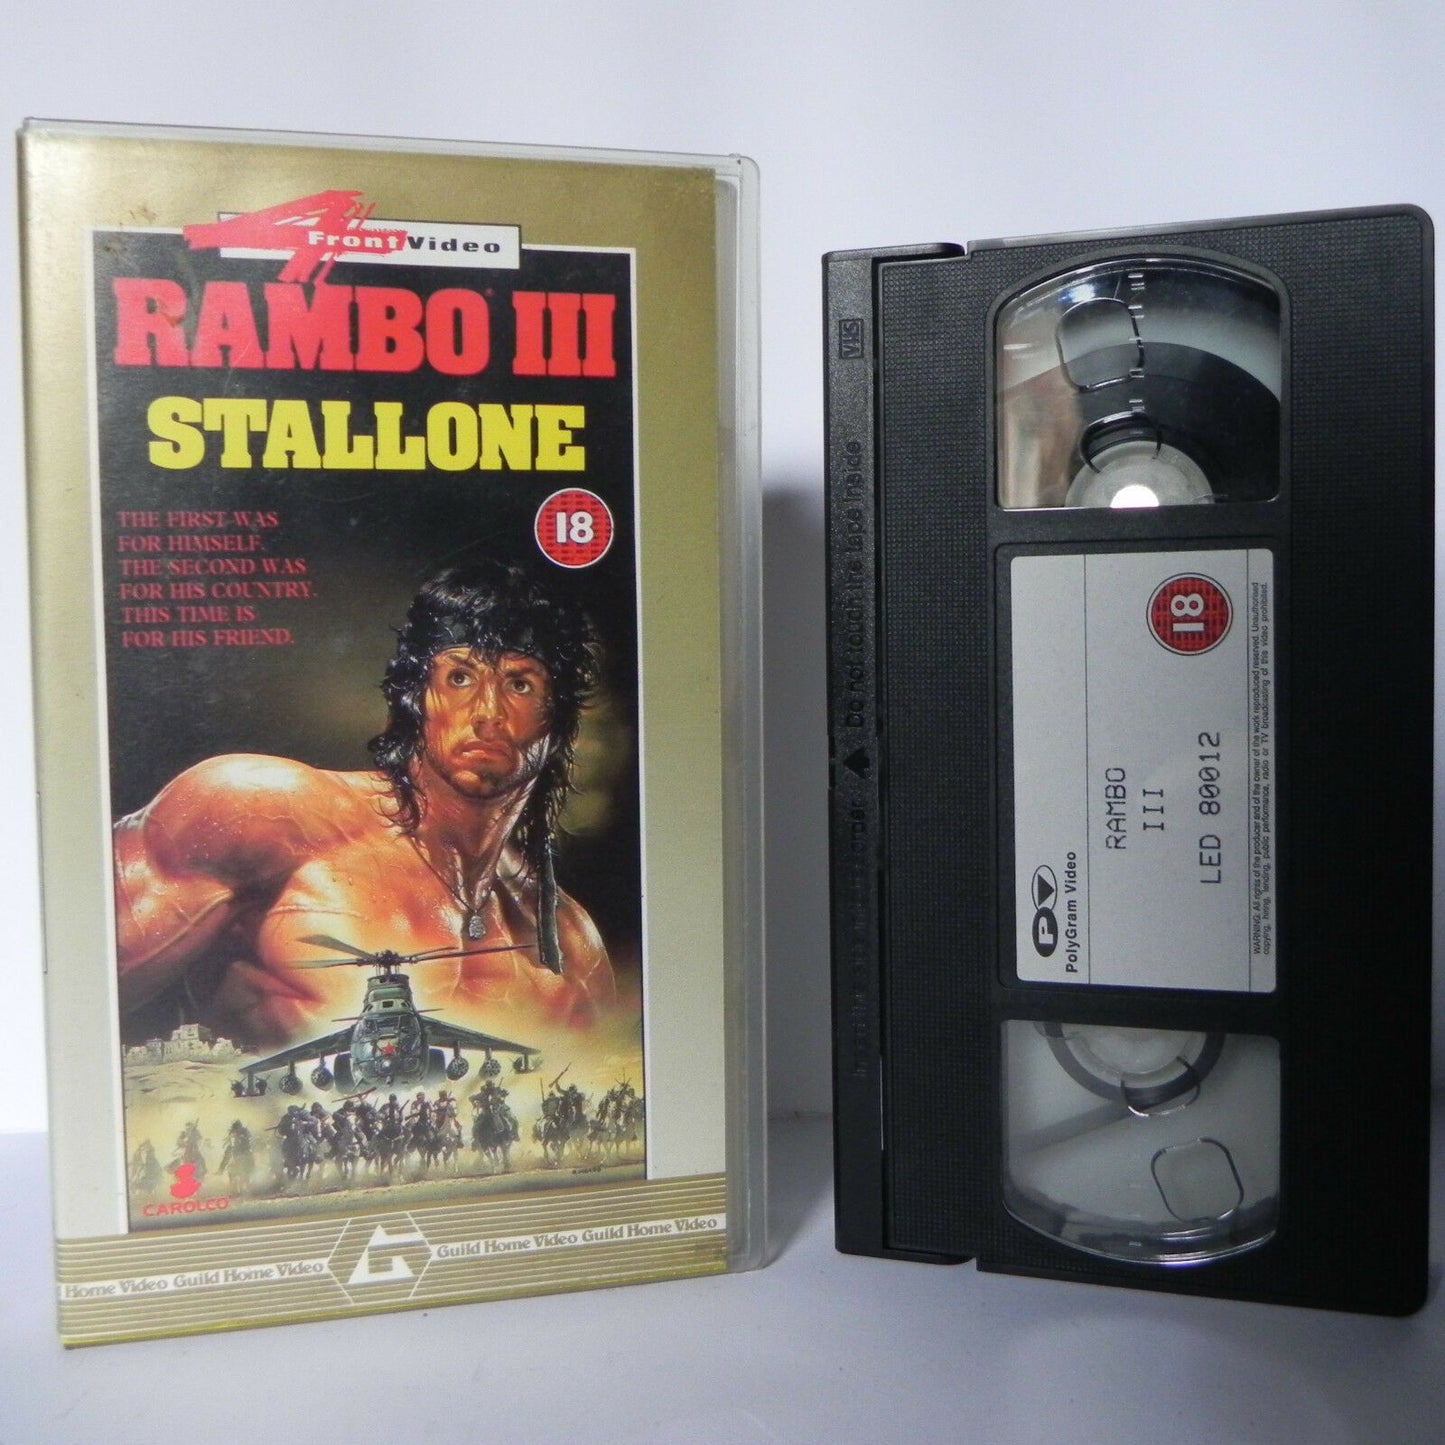 Rambo 3: Sylvester Stallone - (1988) Action/Adventure - Soviet-Afghan War - VHS-